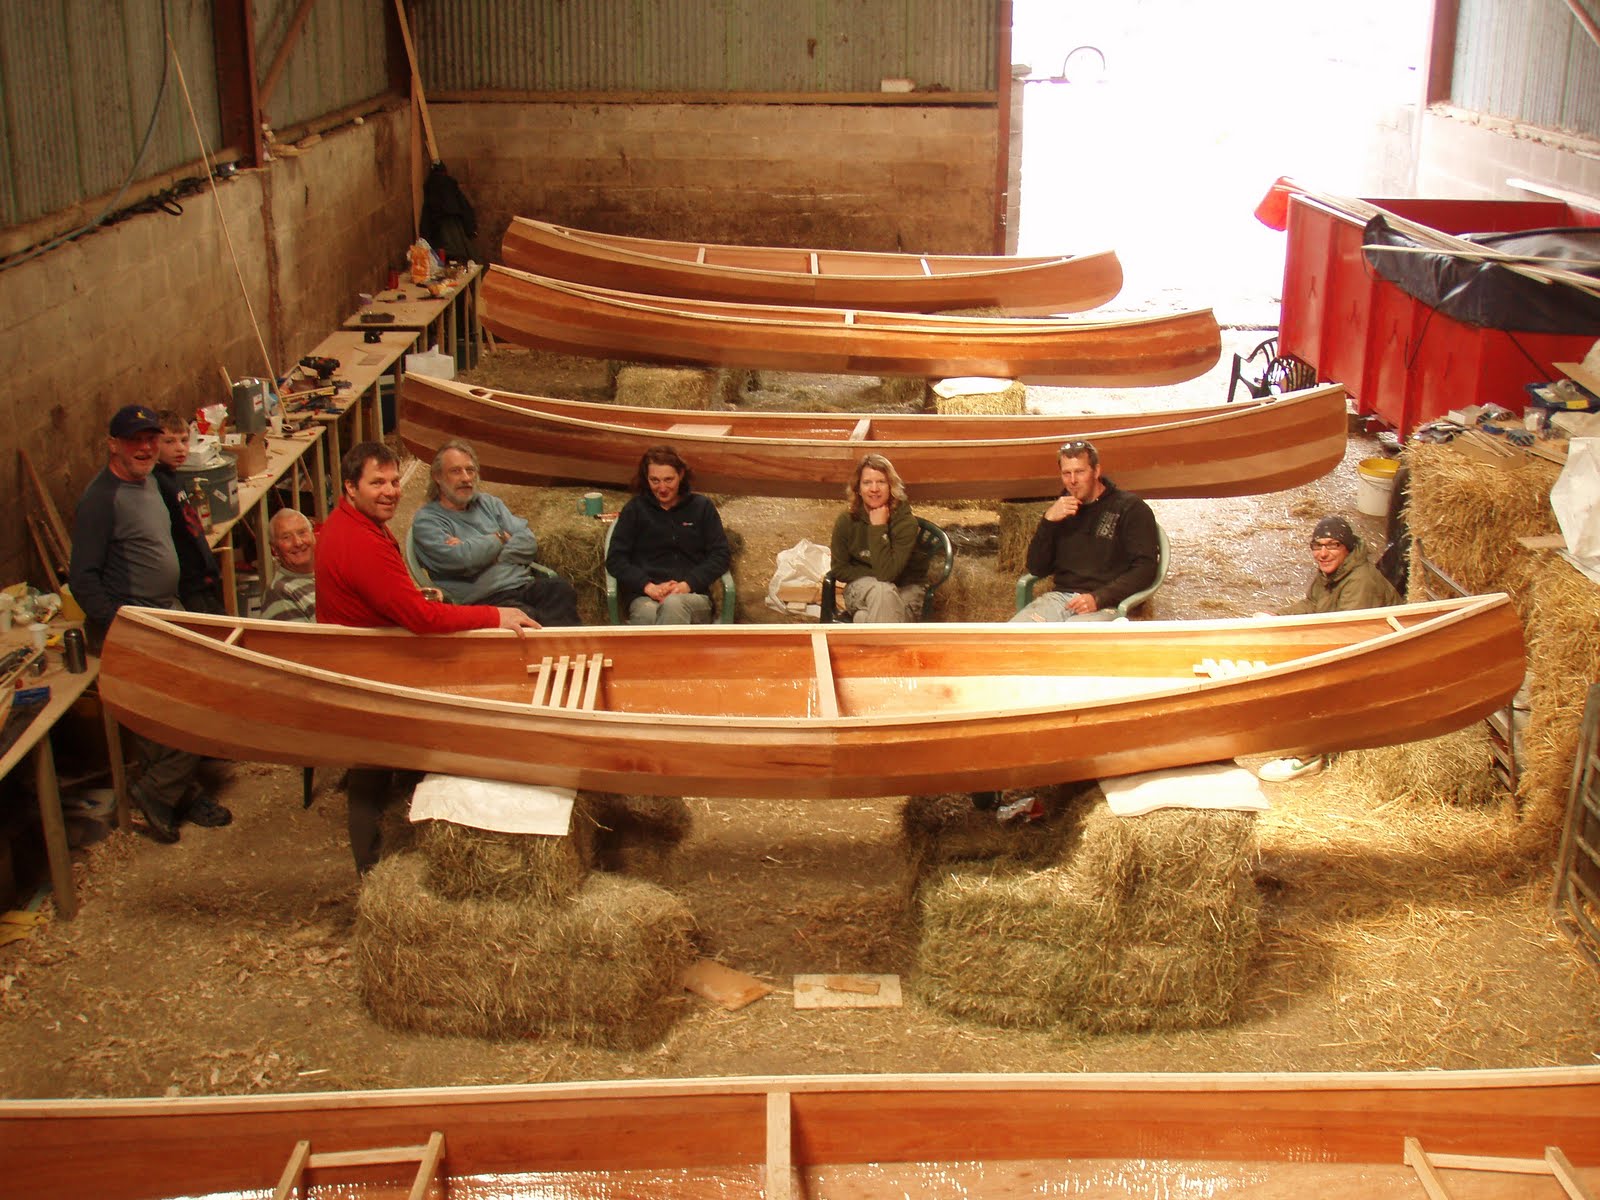 Thanks to all for a great canoe building workshop, 5 beautiful canoes 